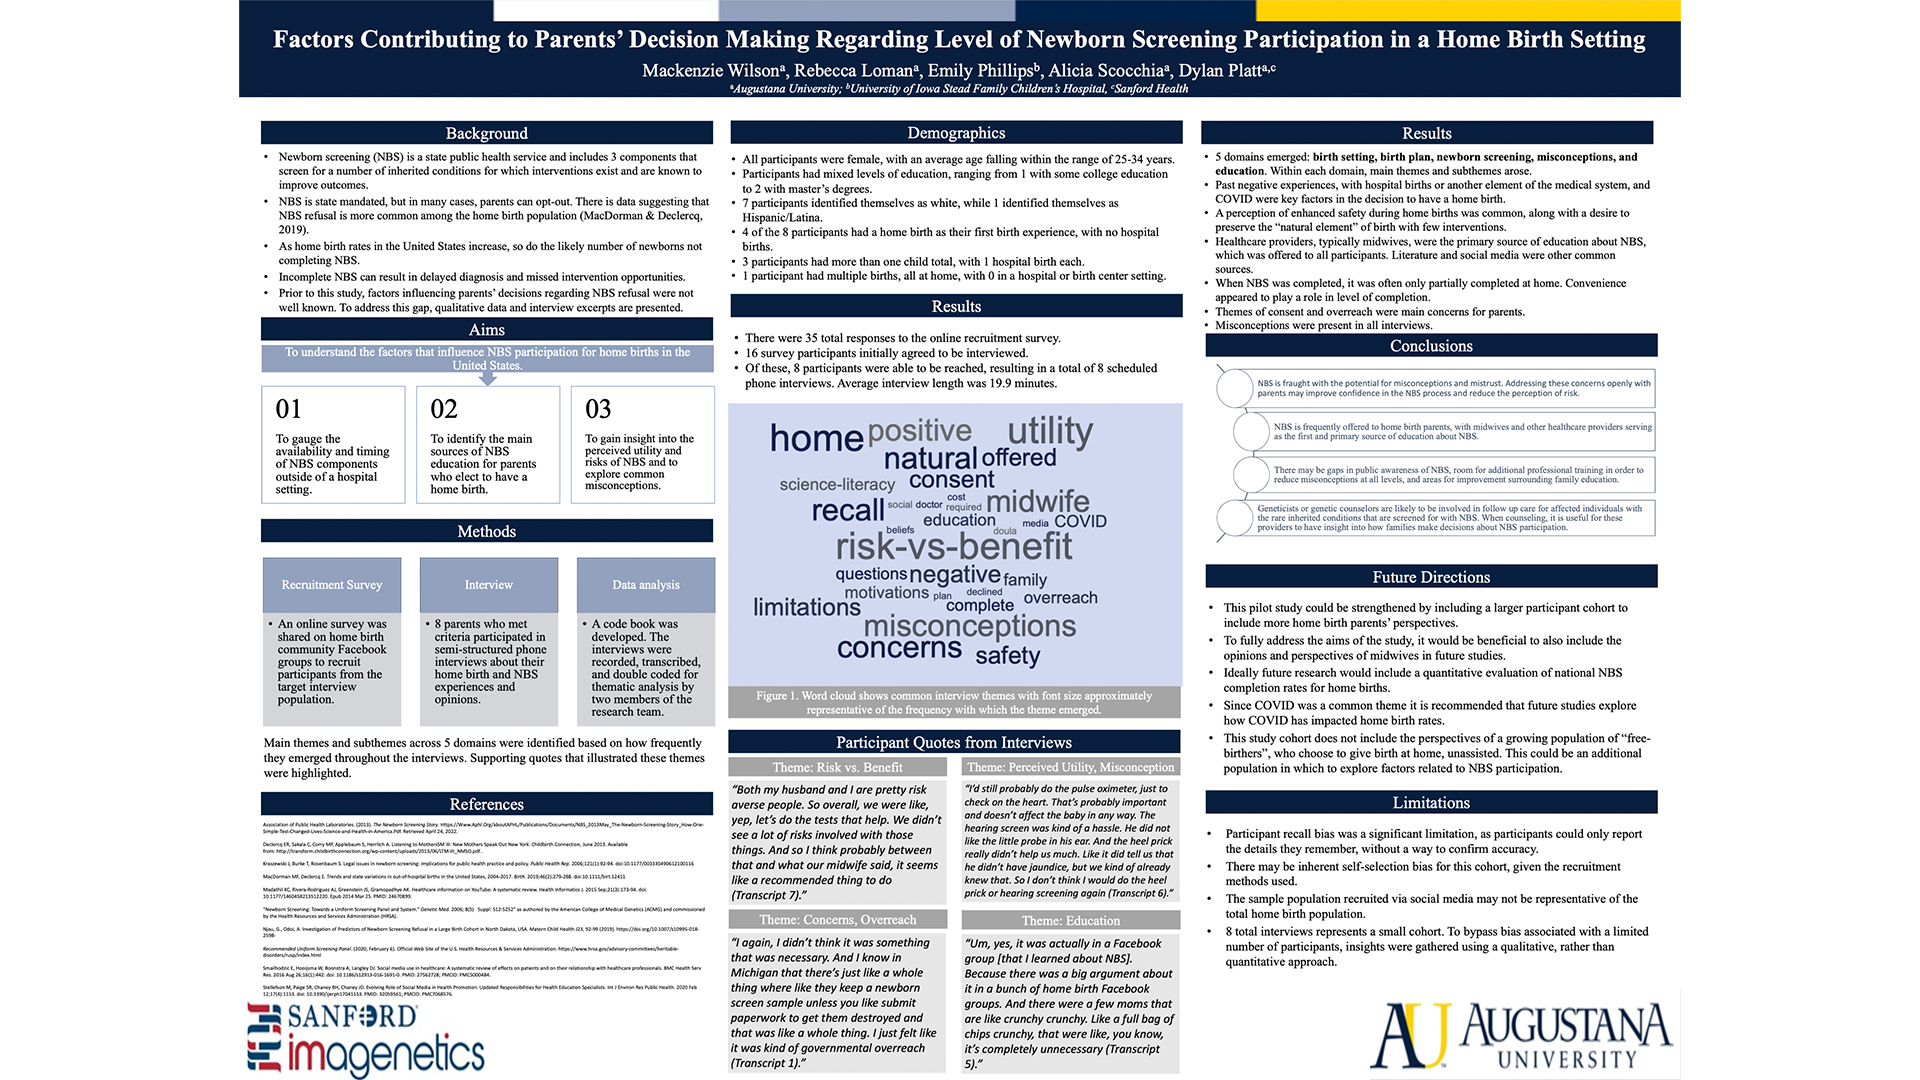 Factors Contributing to Parents’ Decision Making Regarding Level of Newborn Screening Participation in a Home Birth Setting Poster